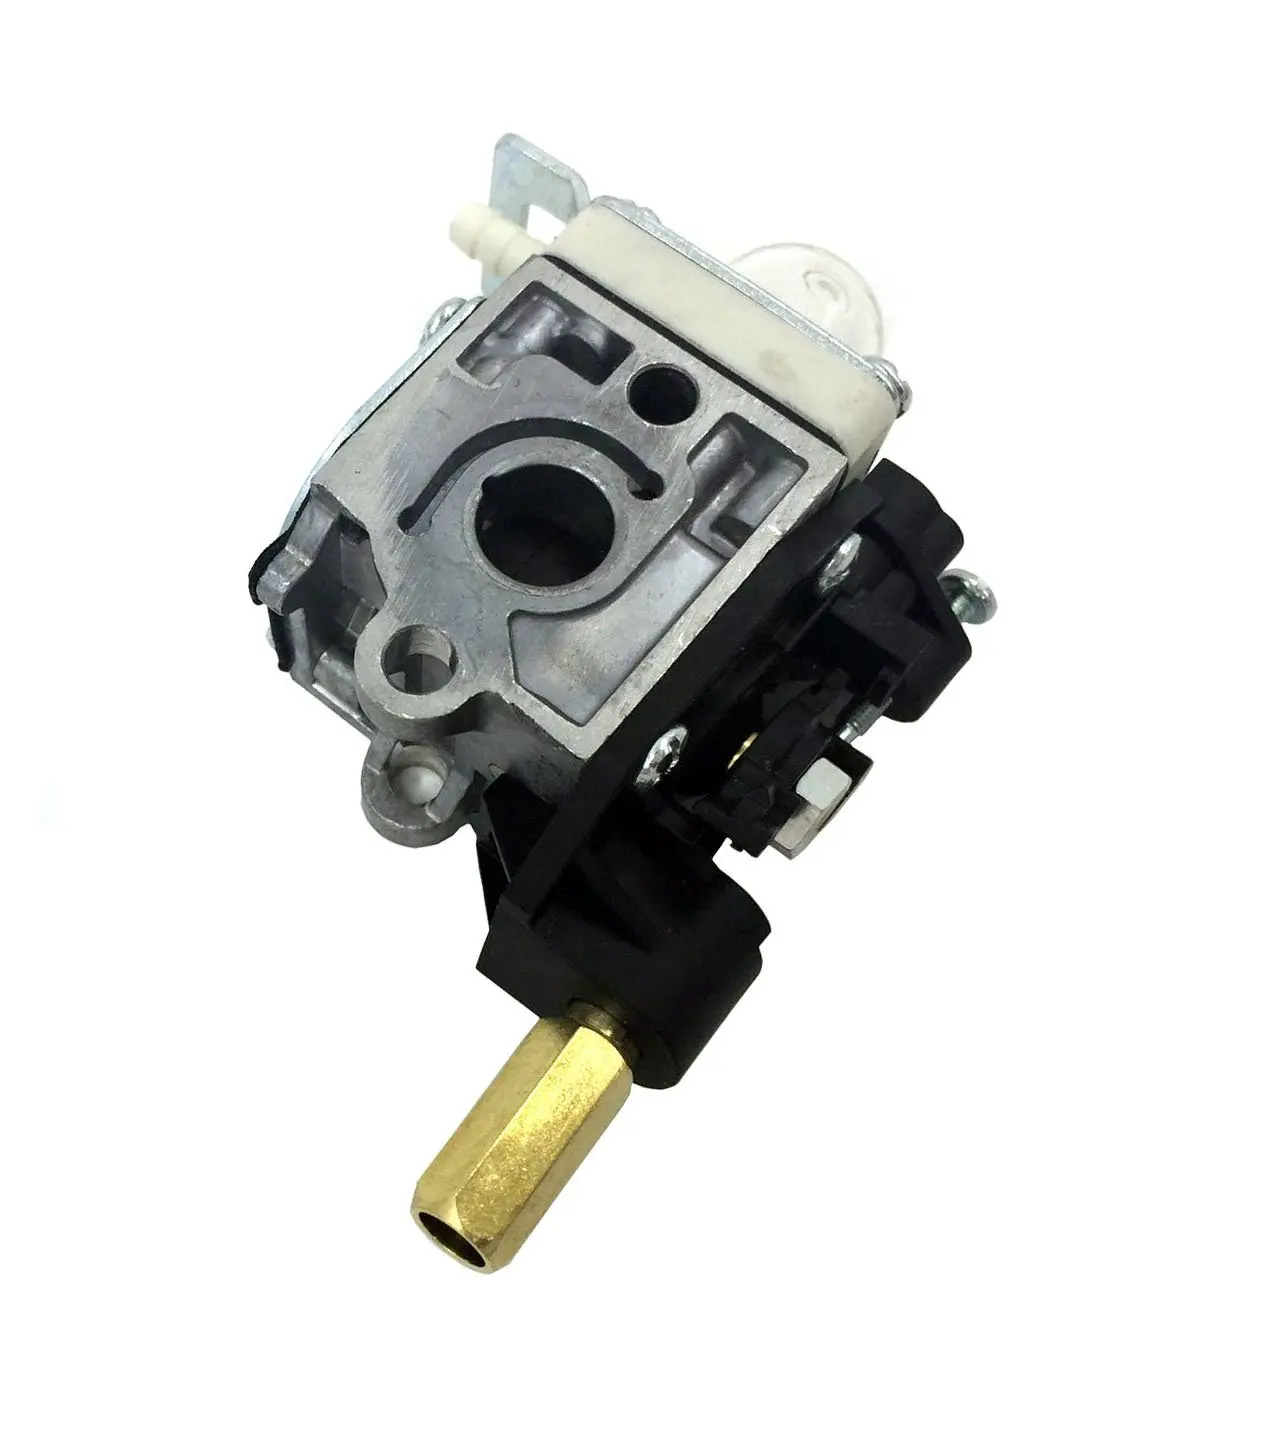 

New Carburetor For Zama RB-K112 Echo SRM-266 HCA-266 PAS-266 PE-266 PPT-266 SHC-266 Carb Replacement Accessories Free Shipping